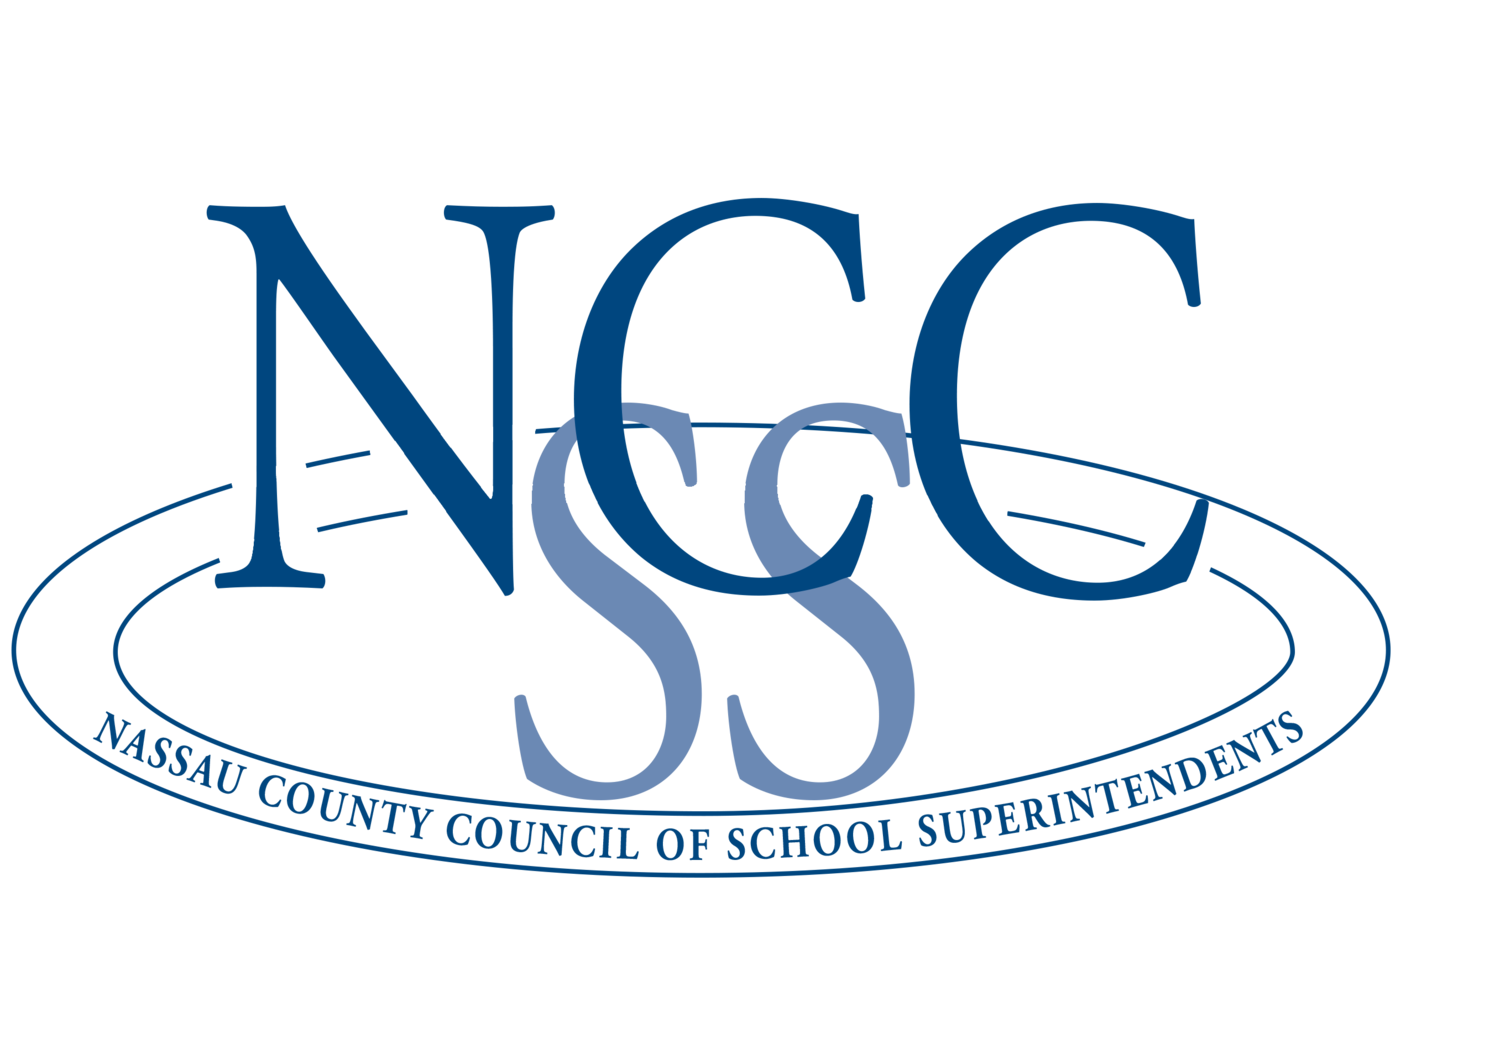 Nassau County Council of School Superintendents